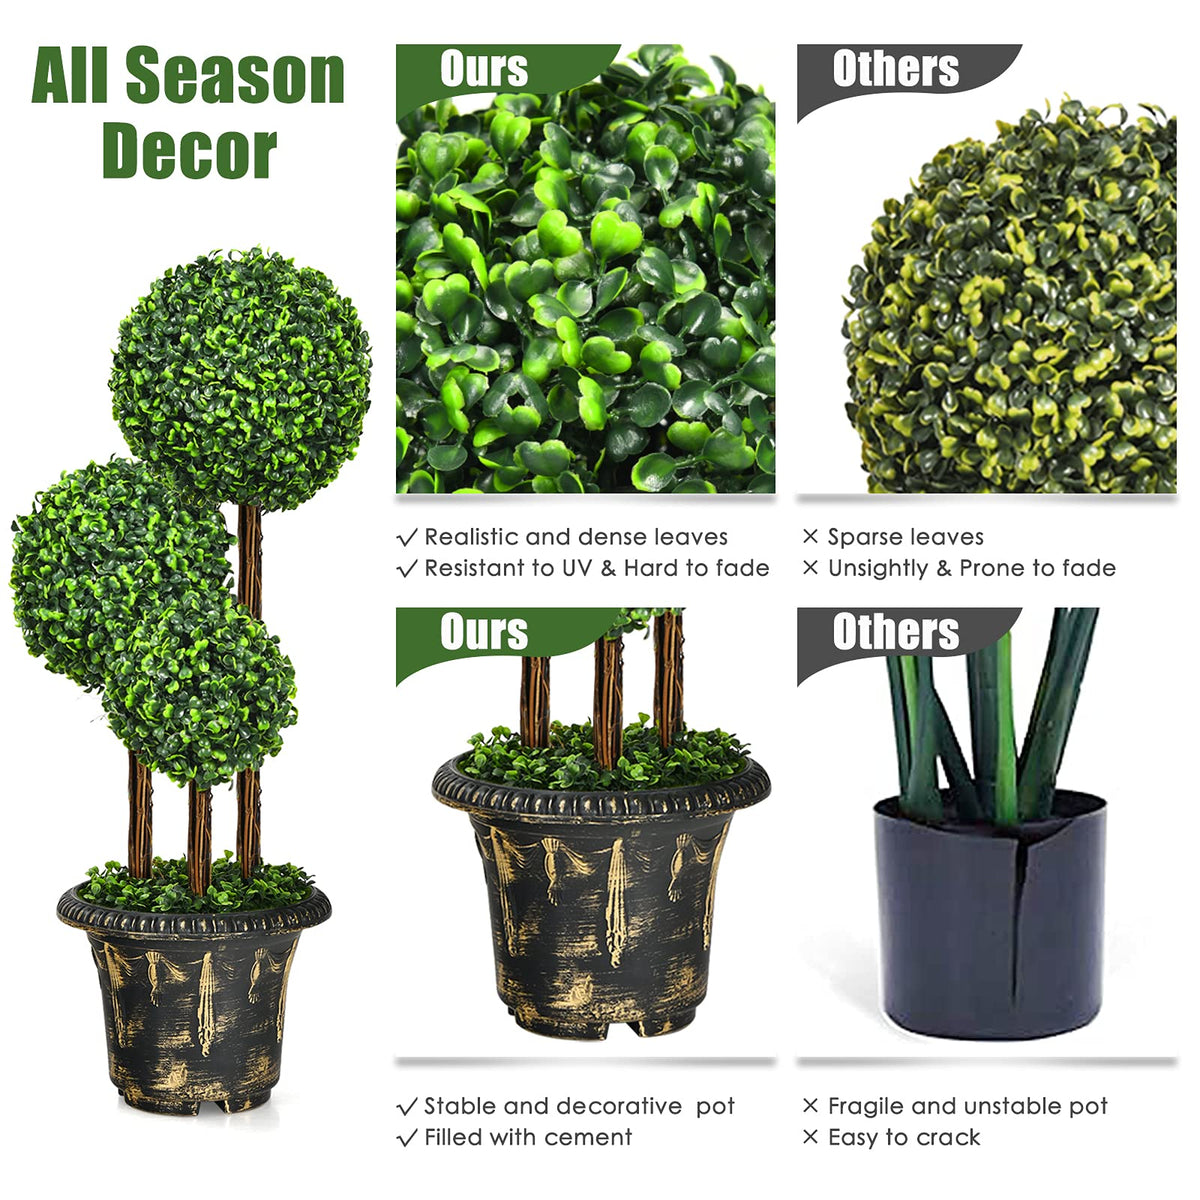 Giantex Topiary Artificial Tree, Fake Greenery Plants w/Realistic Leaves, Decorative Pot